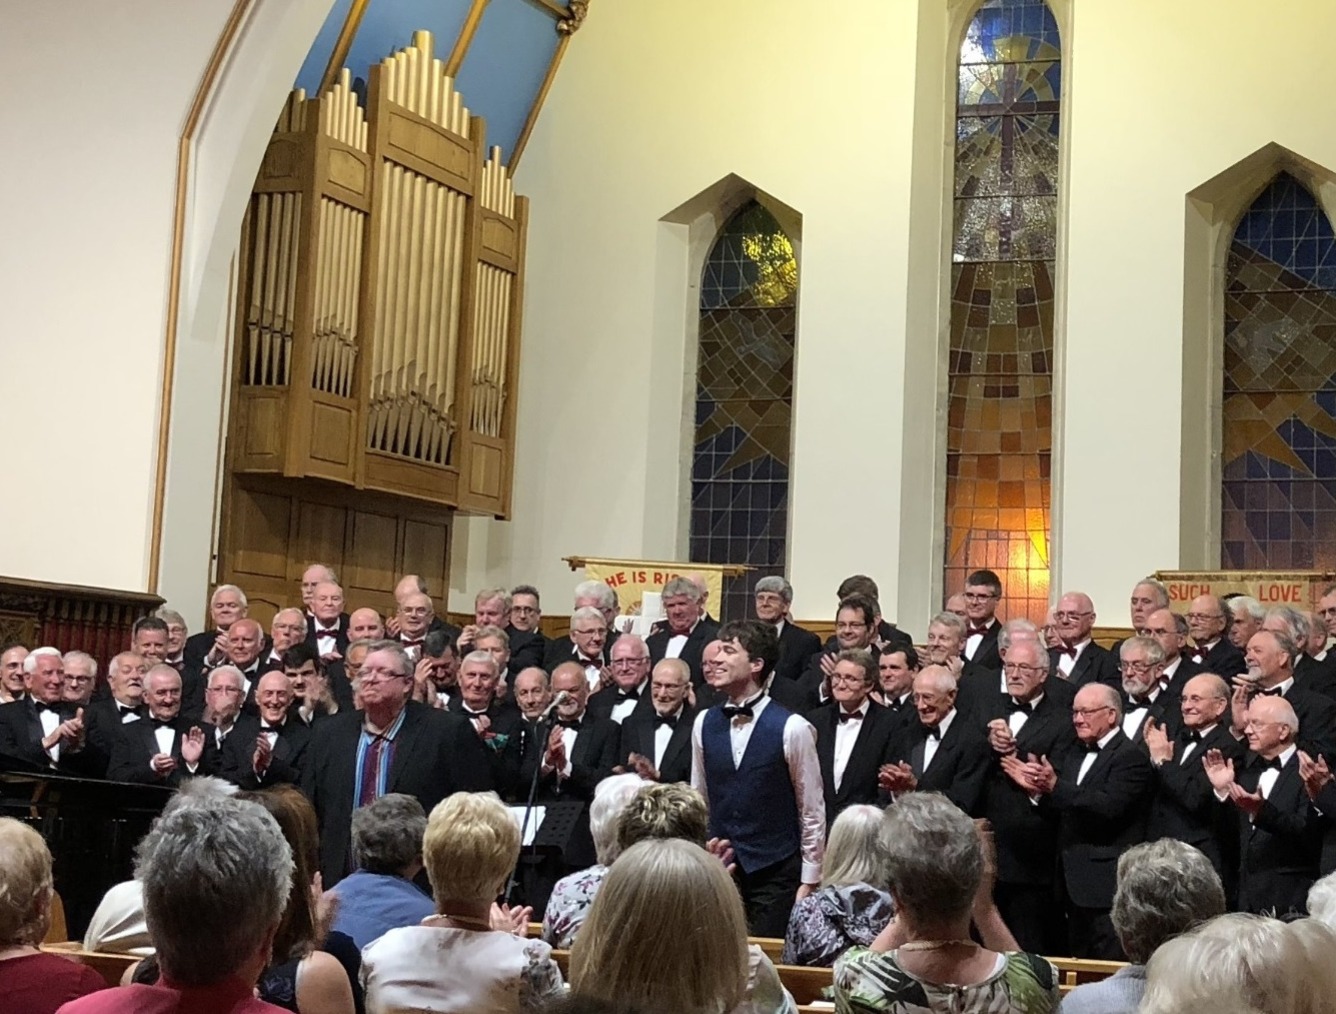 Joint concert with Colwyn Bay